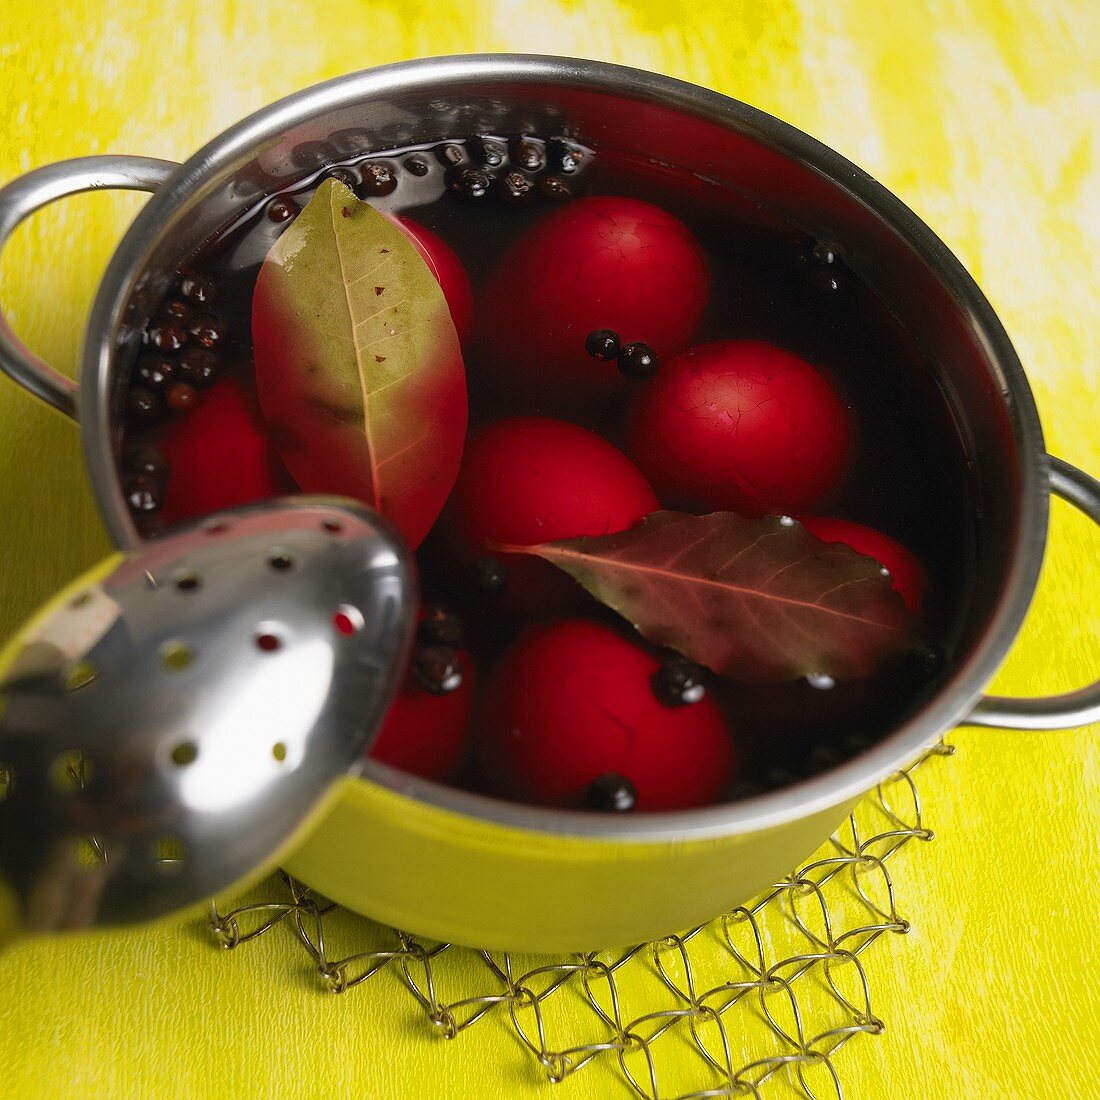 Dyeing eggs by standing in red dyeing liquid (natural dyeing)